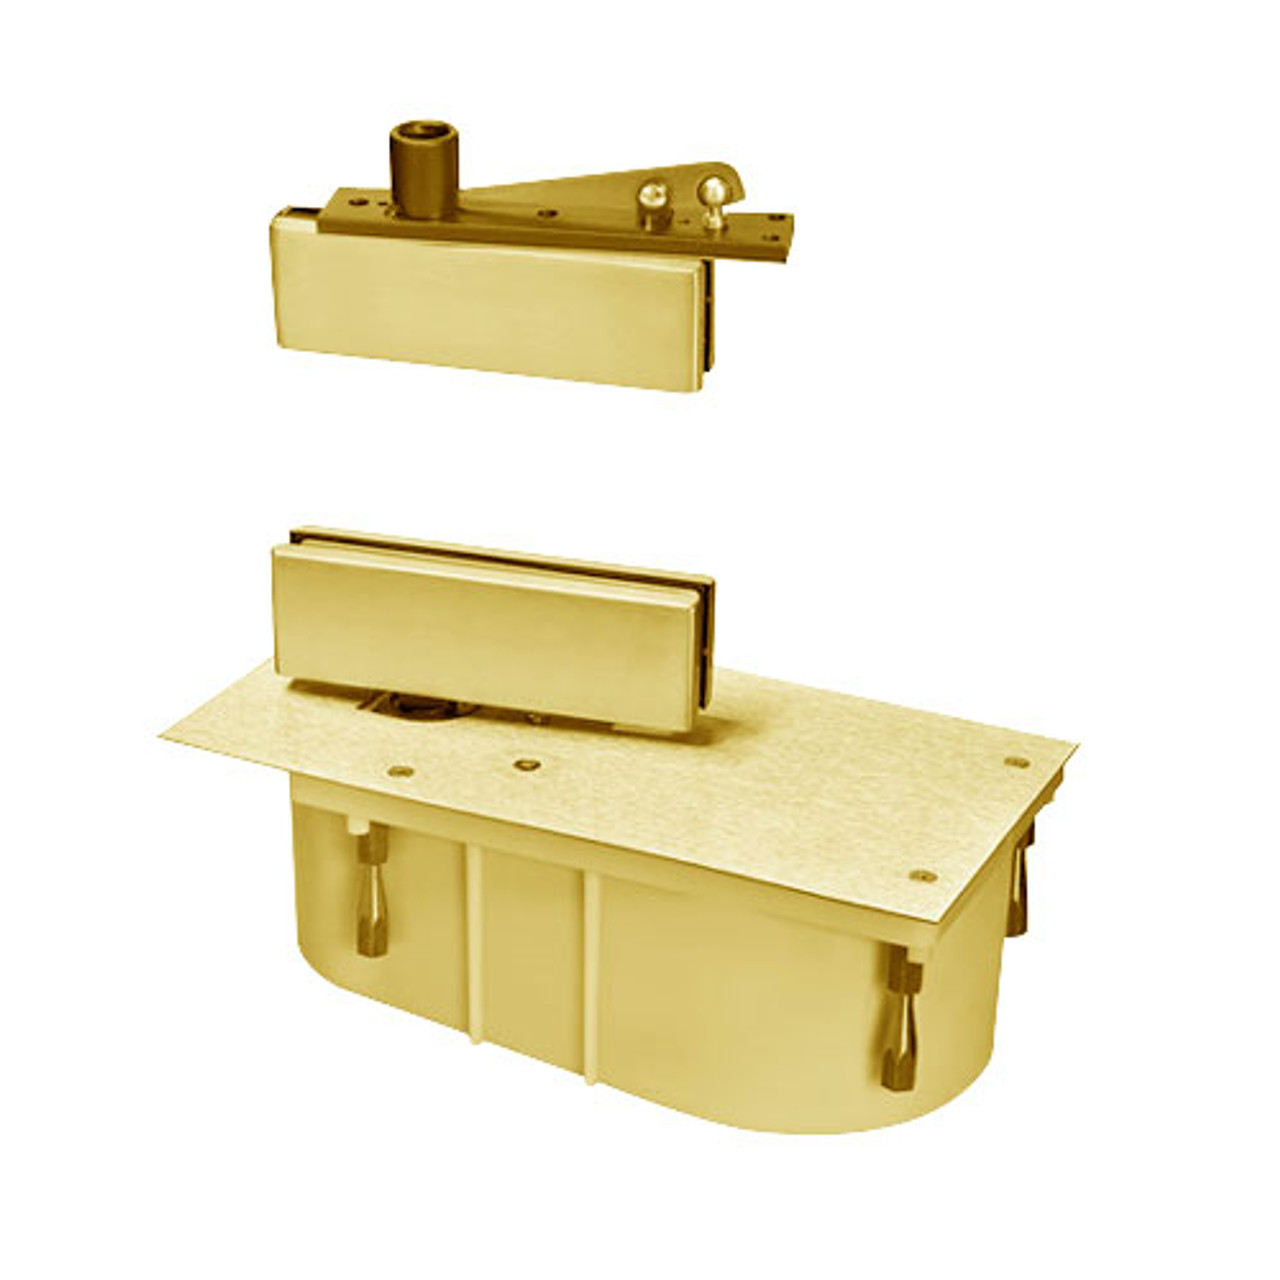 428-105S-CWF-LH-605 Rixson 428 Series Heavy Duty Single Acting Center Hung Floor Closer with Patch Fittings in Bright Brass Finish